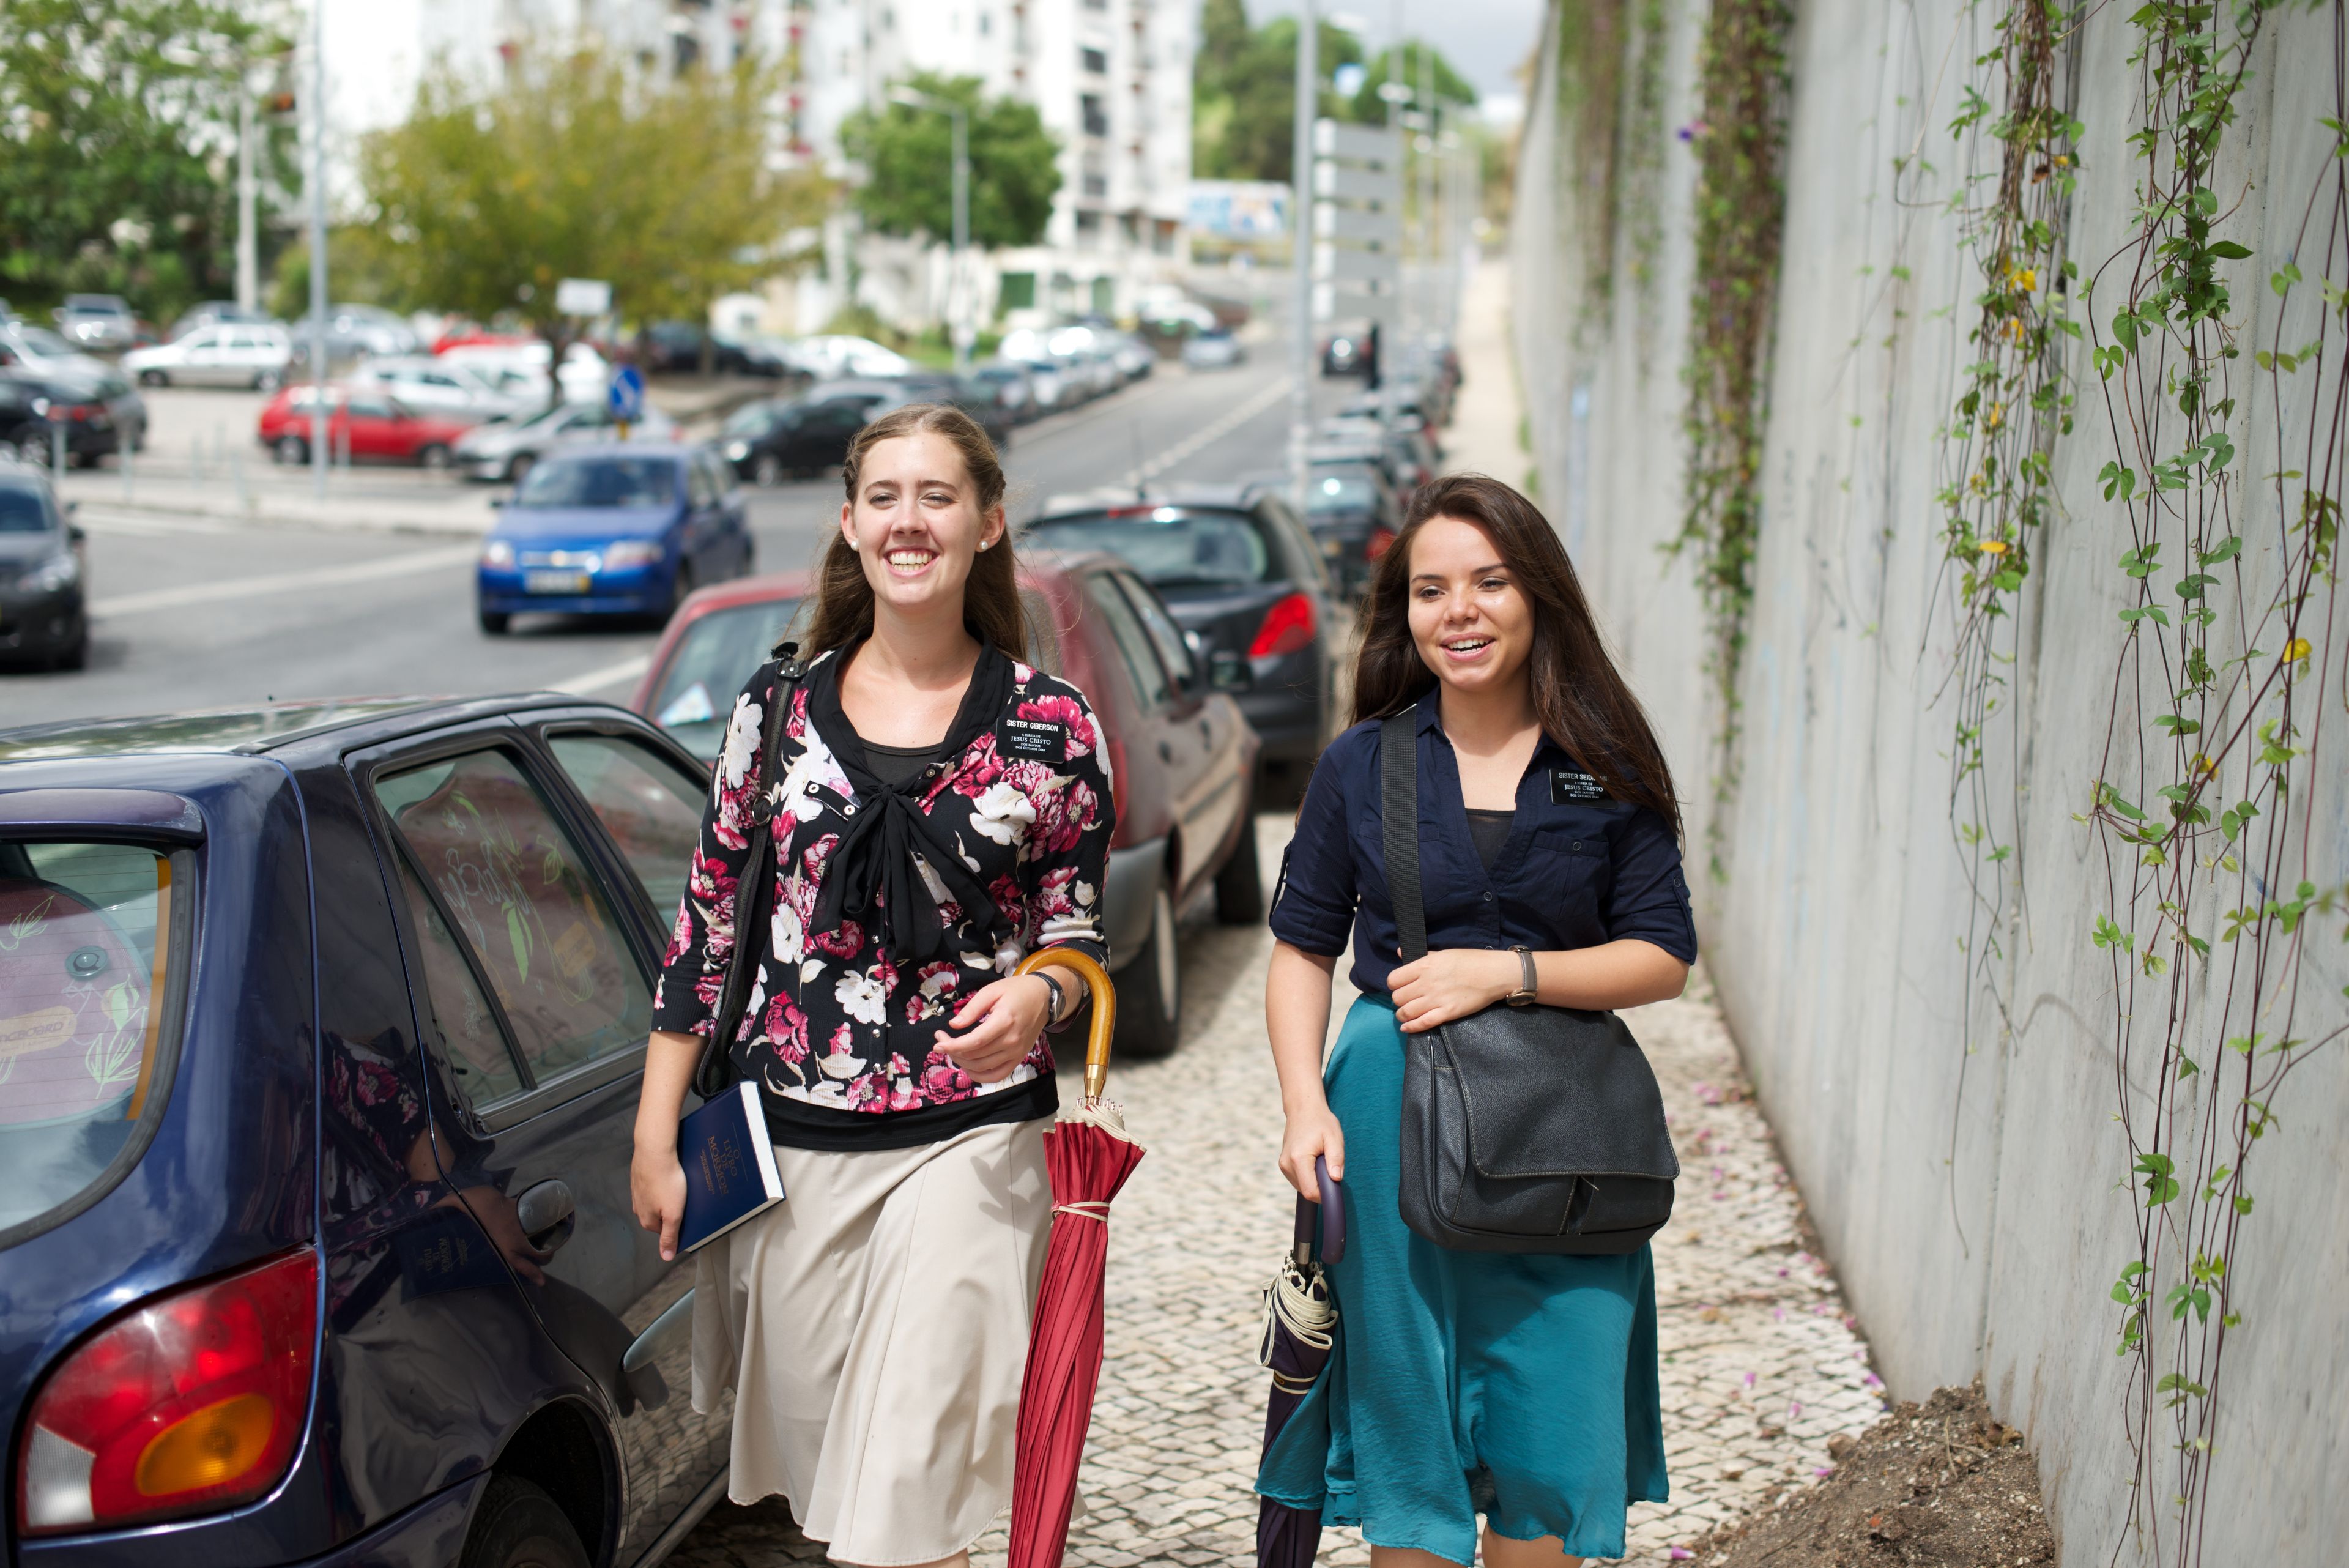 Sister missionaries walking down a street and holding umbrellas.